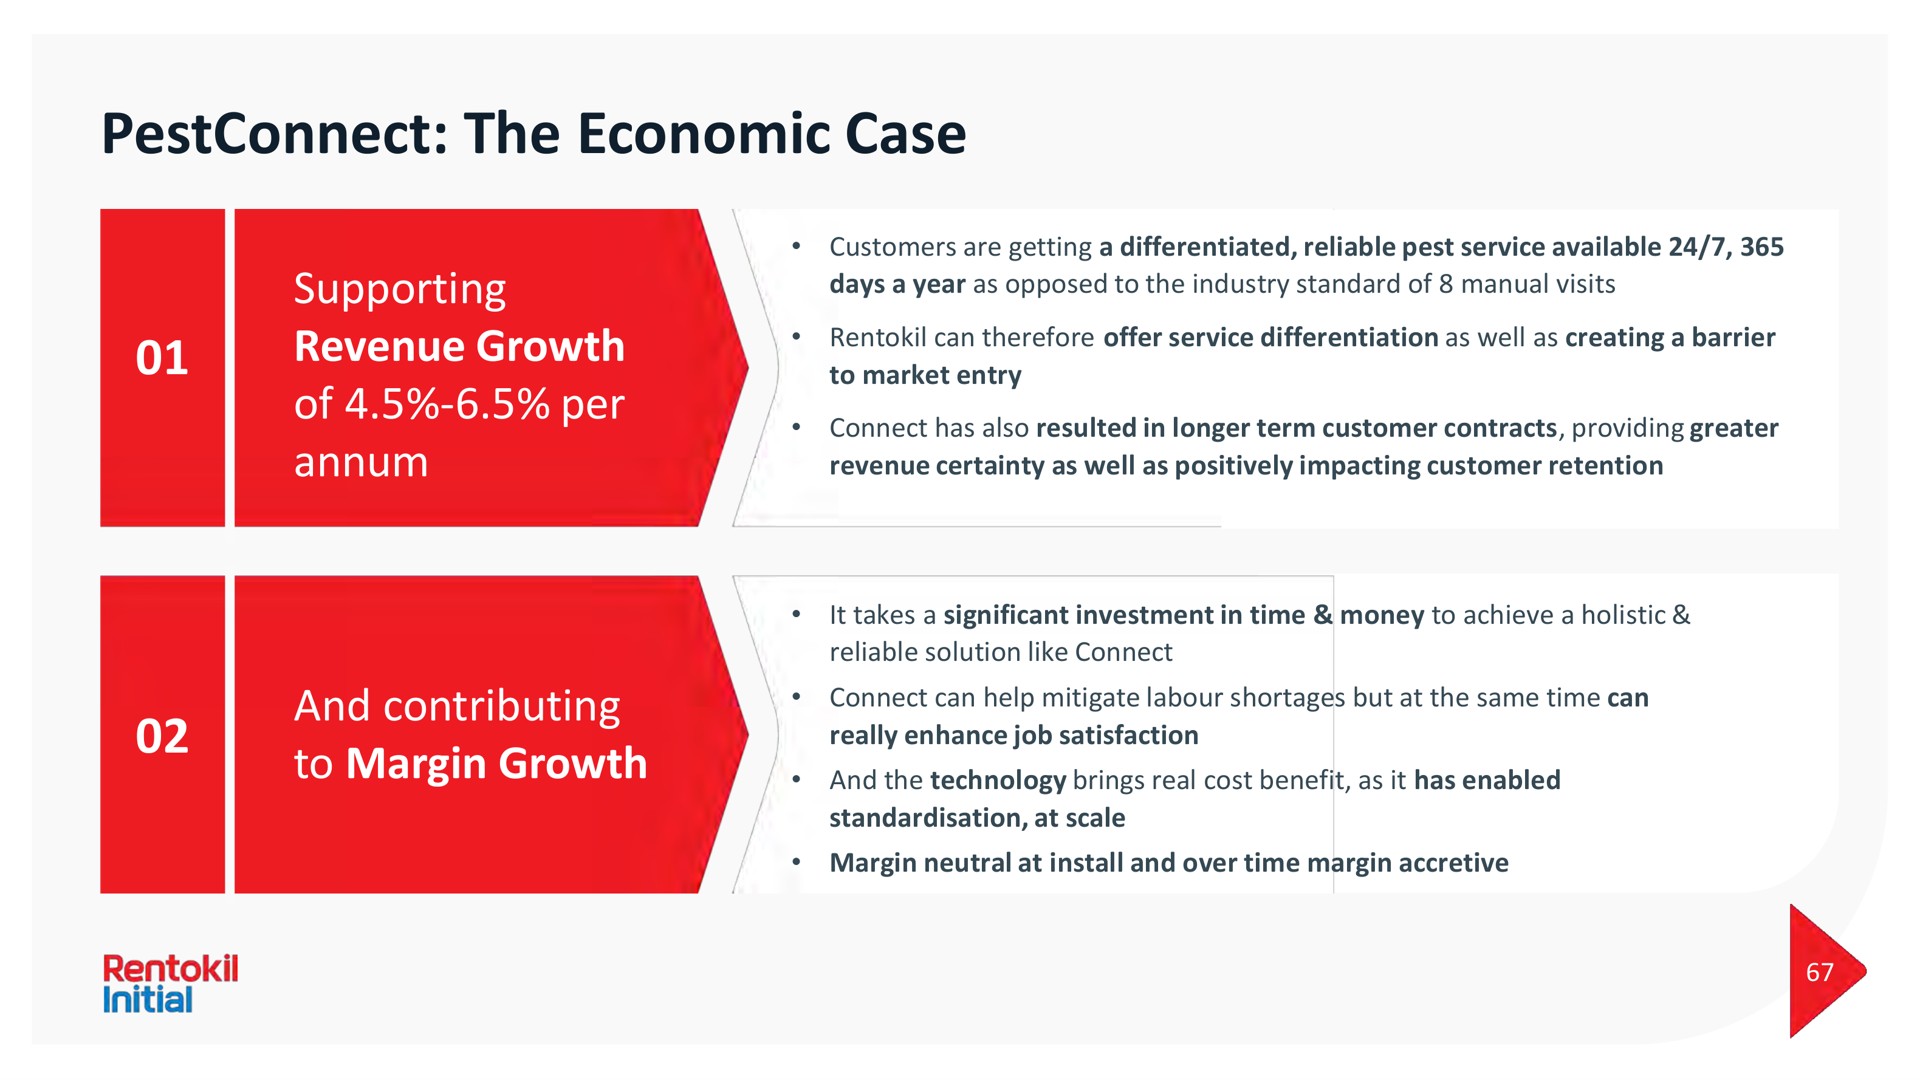 the economic case supporting revenue growth of per and contributing to margin growth | Rentokil Initial